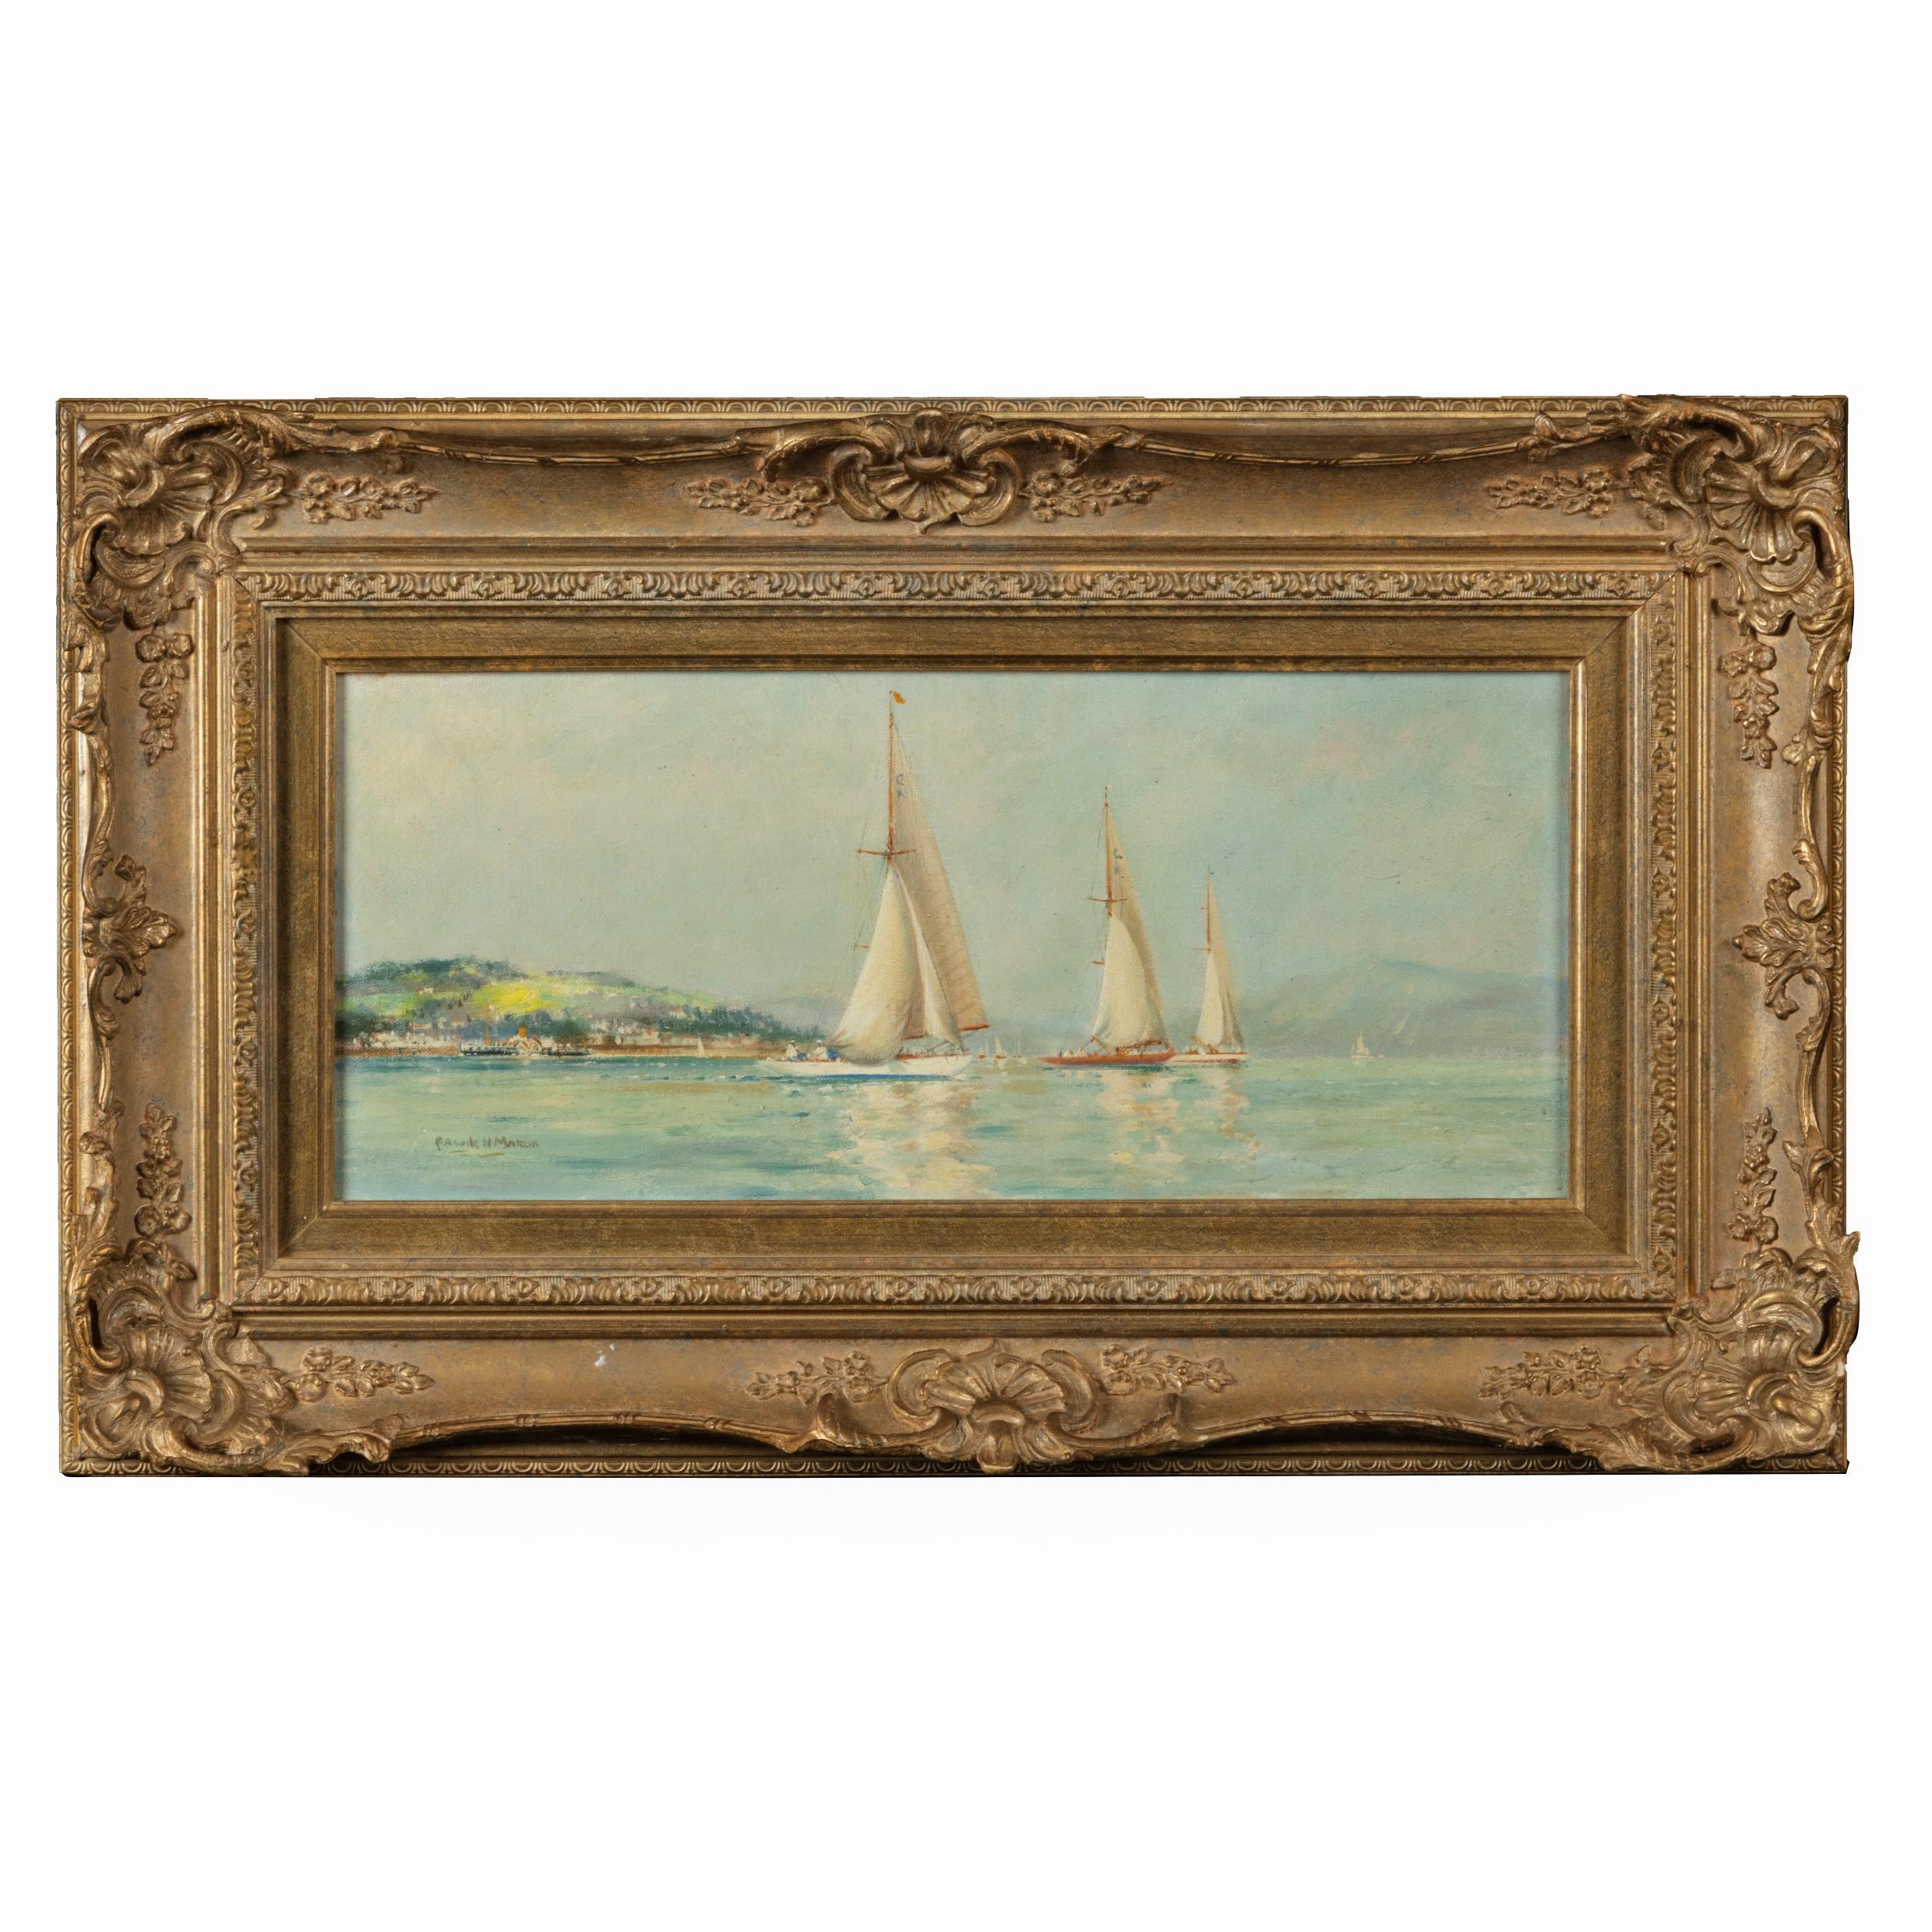 A pair of oil paintings of Clyde One Design yachts racing by Frank Henry Mason, oil on canvas each of rectangular form, both signed and with paper gallery labels from W.B. Simpson of Glasgow on the reverse, one, showing yachts under spinnaker on a